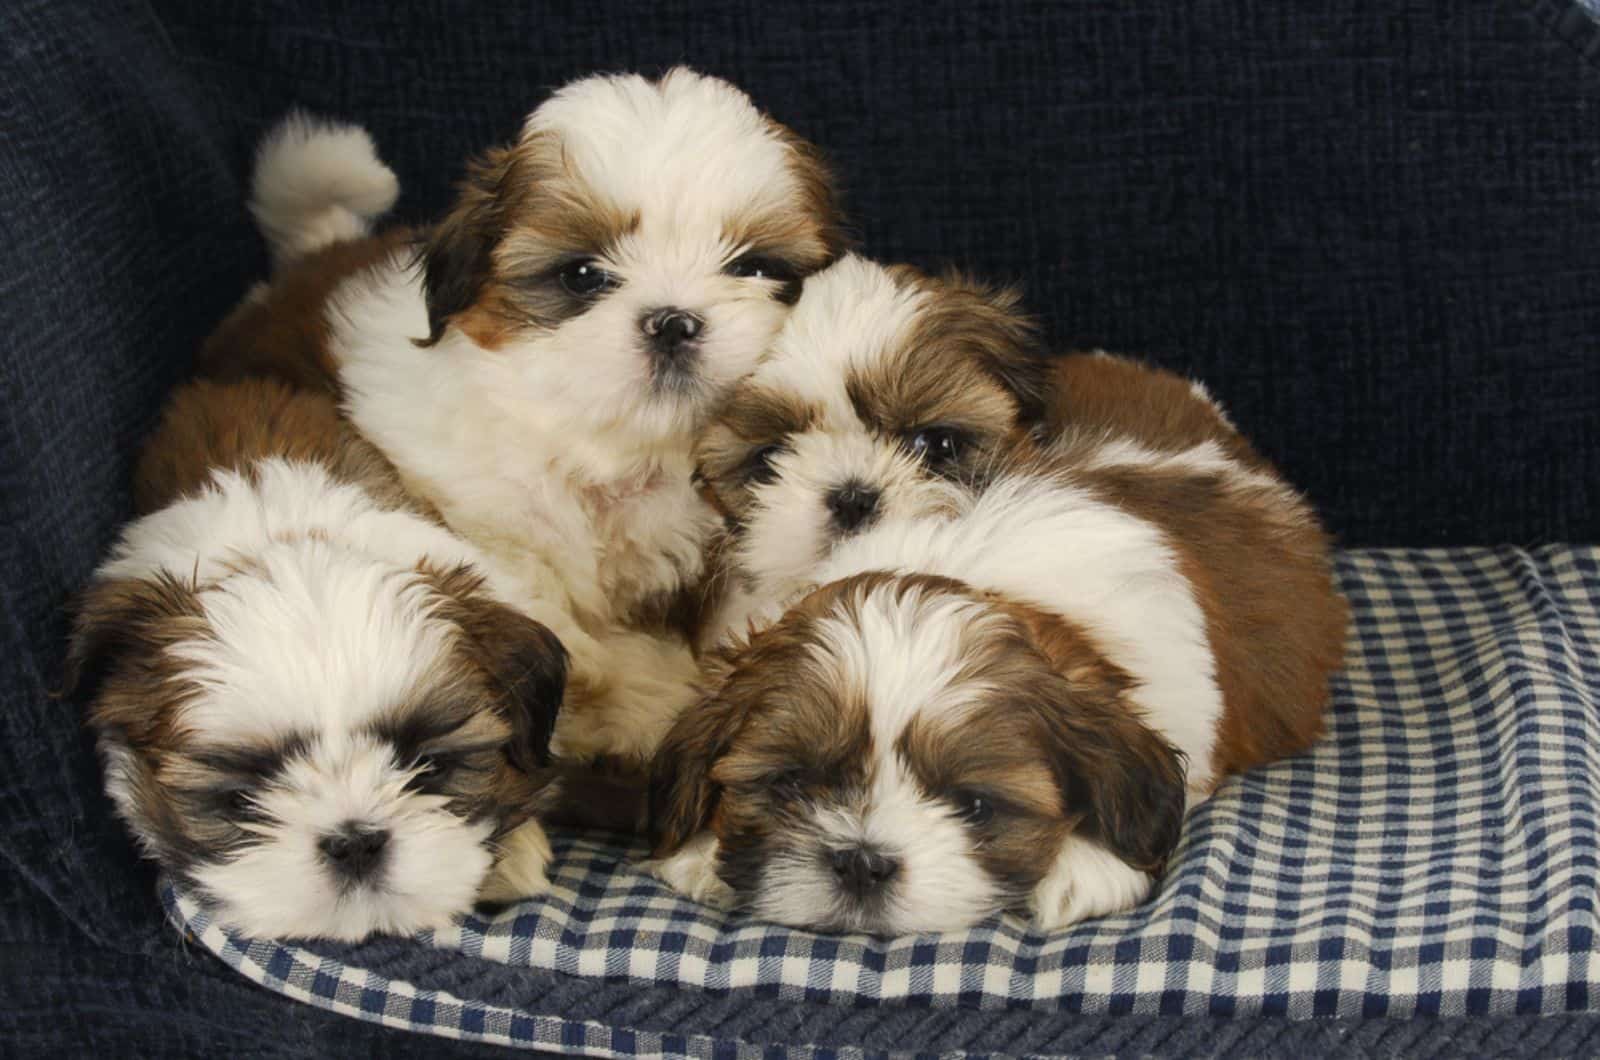 shih tzu puppies lying in the bed